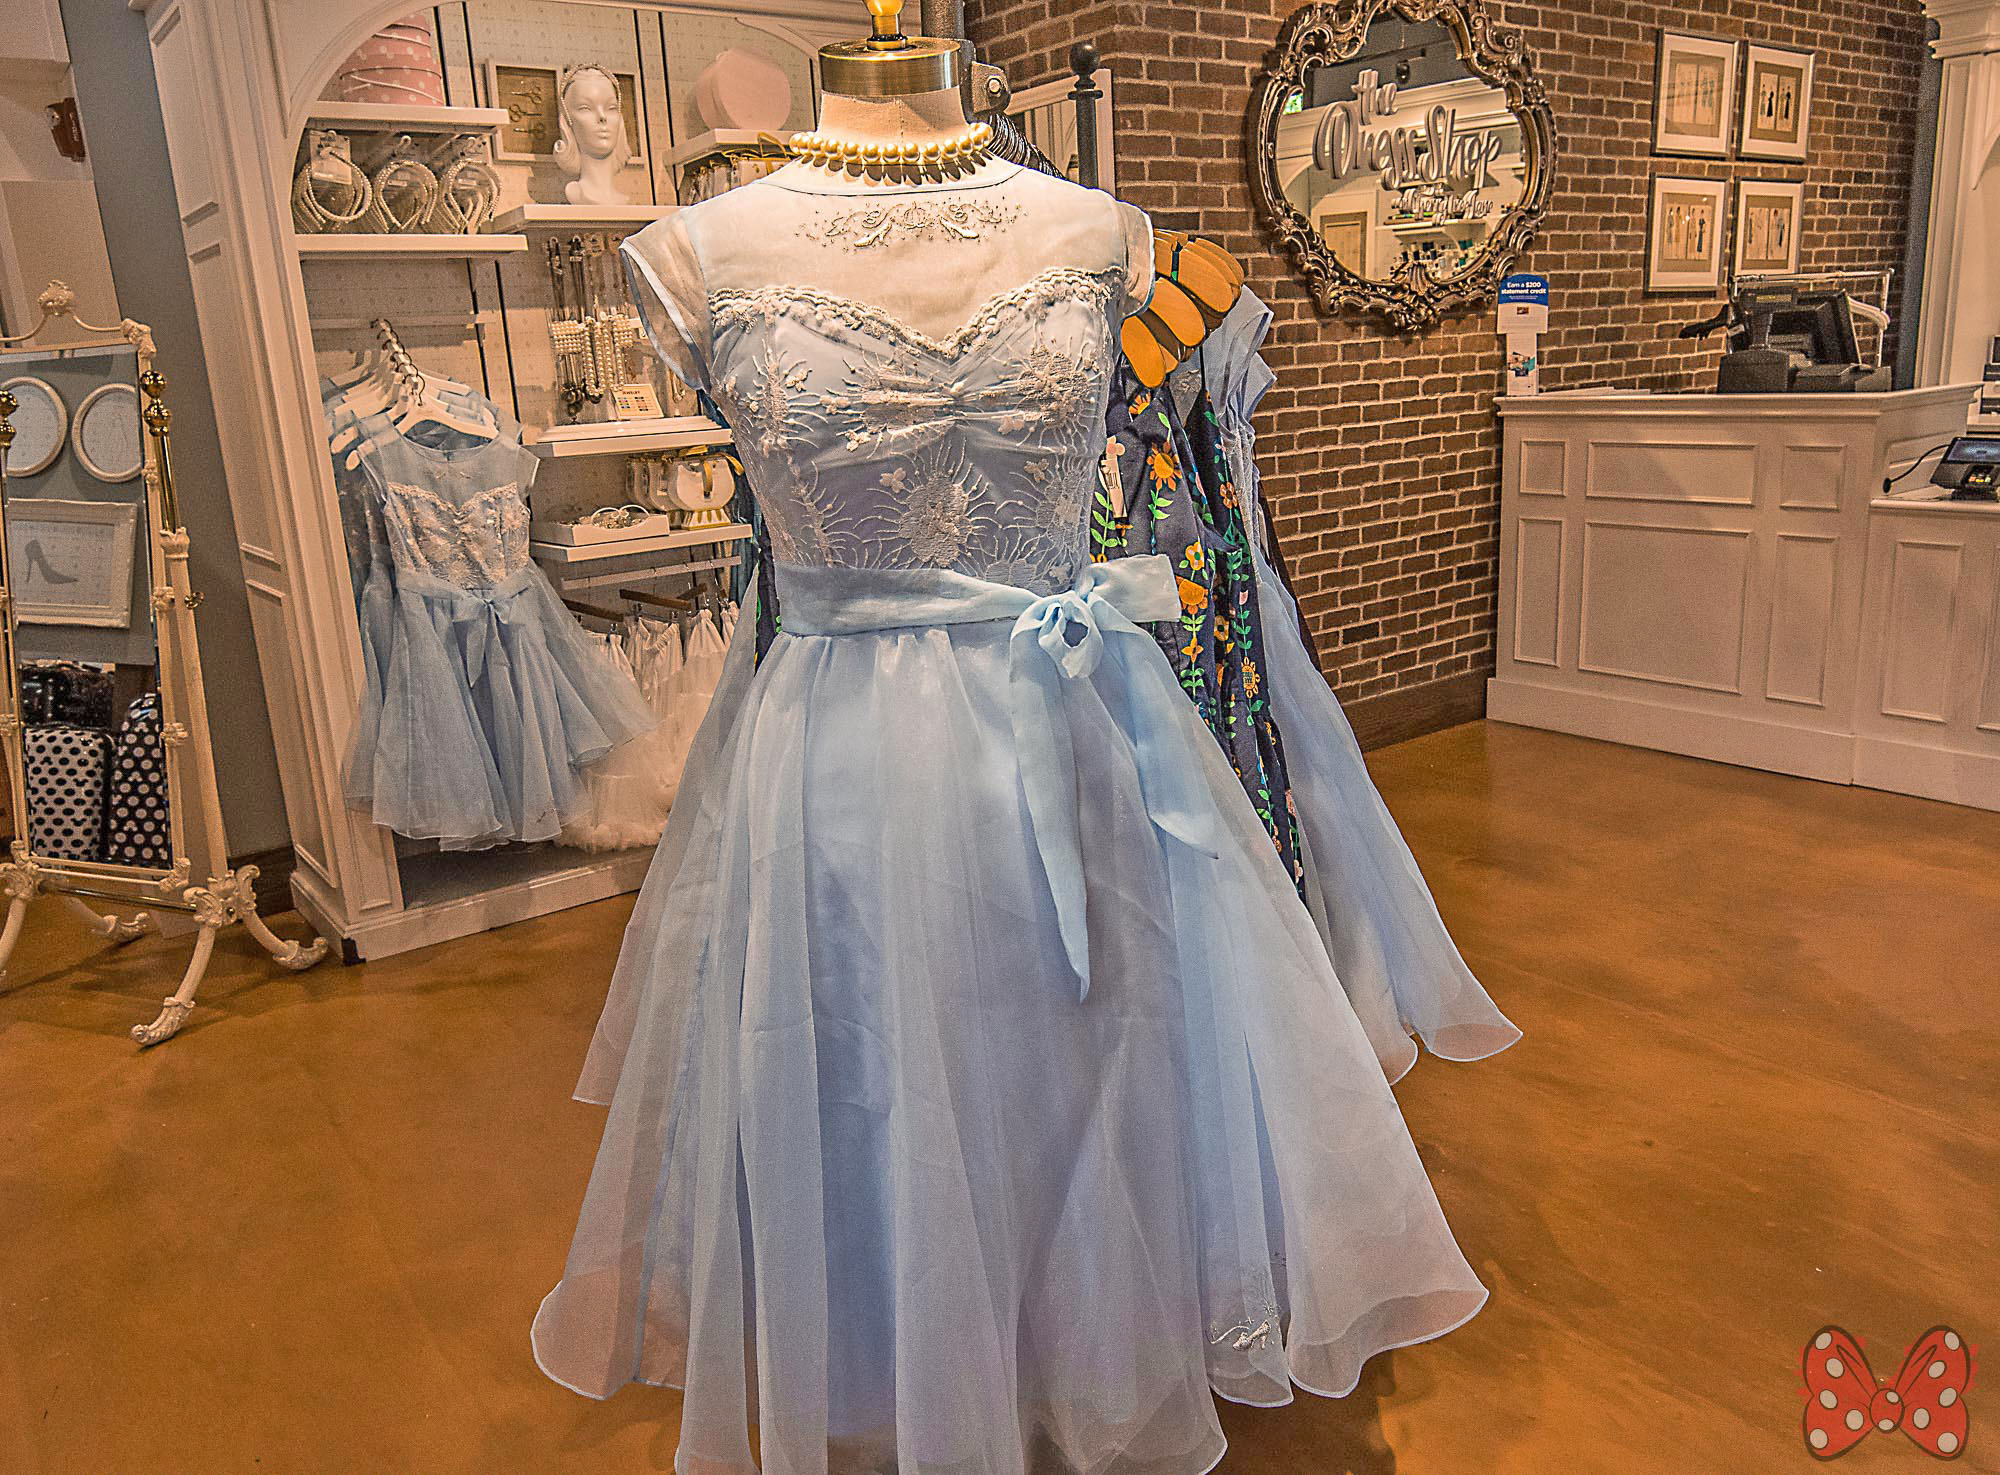 NEW Cinderella-Inspired Dress at The Dress Shop